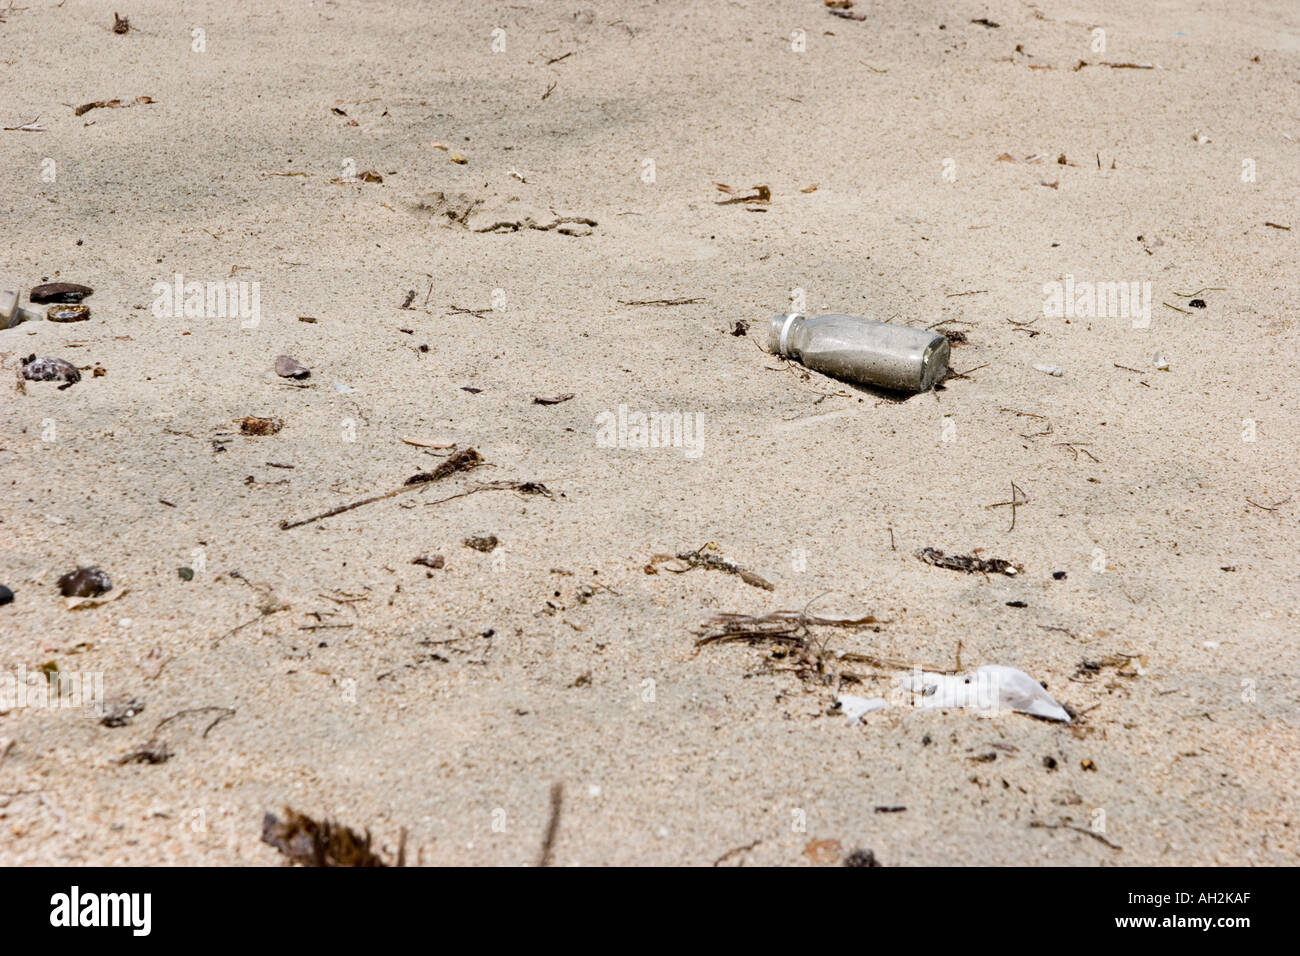 Trash on a polluted beach Stock Photo